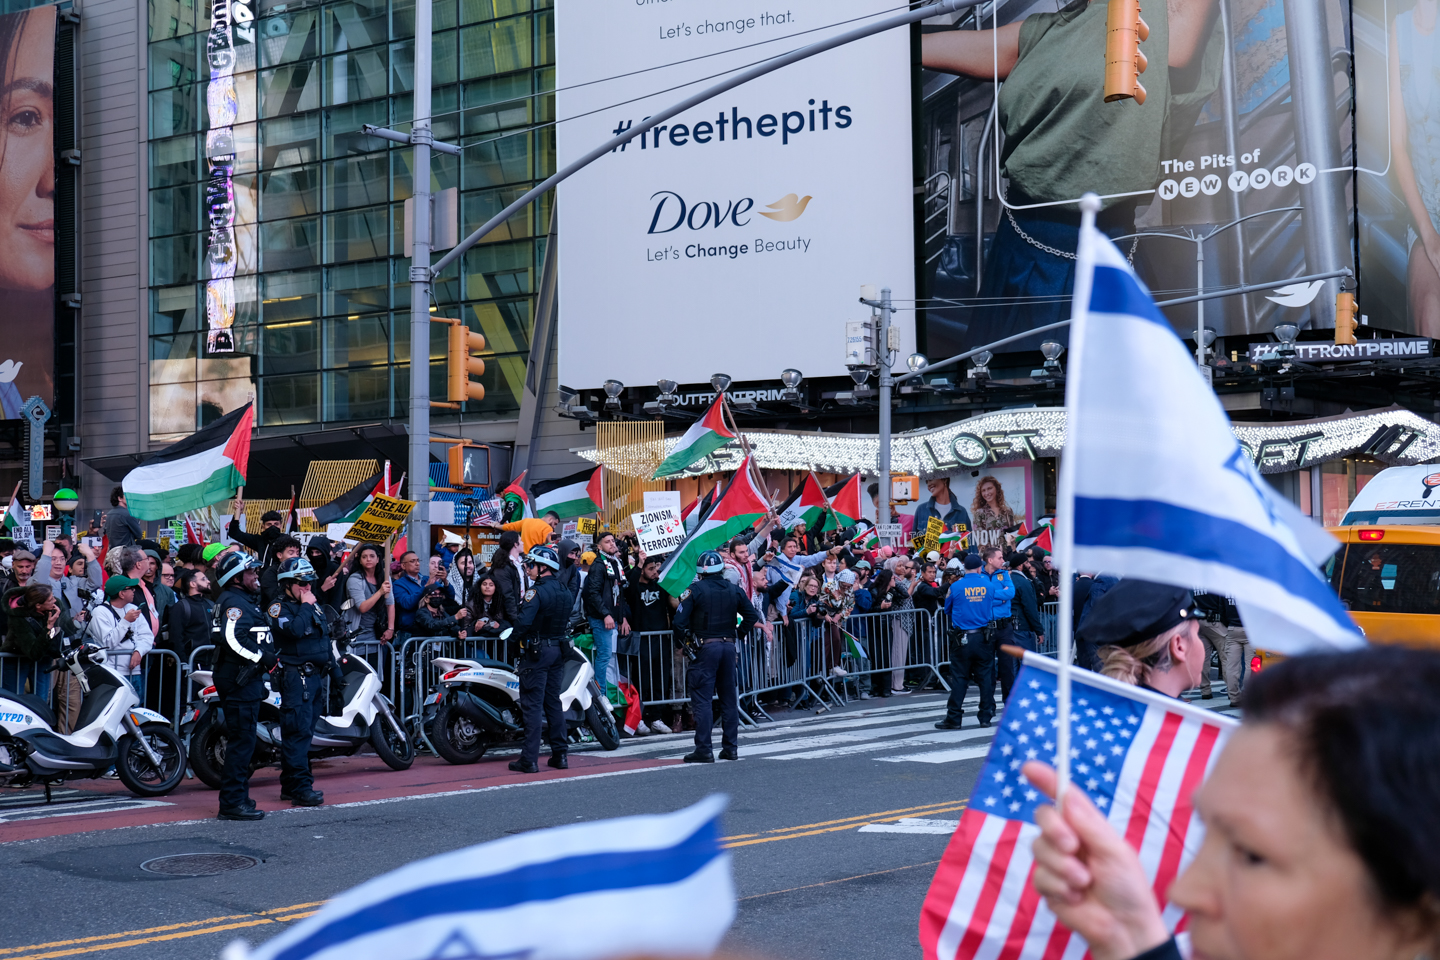 Pro-Israel protesters across the street from pro-Palestine protesters in New York City. Photo by Tess Owen 